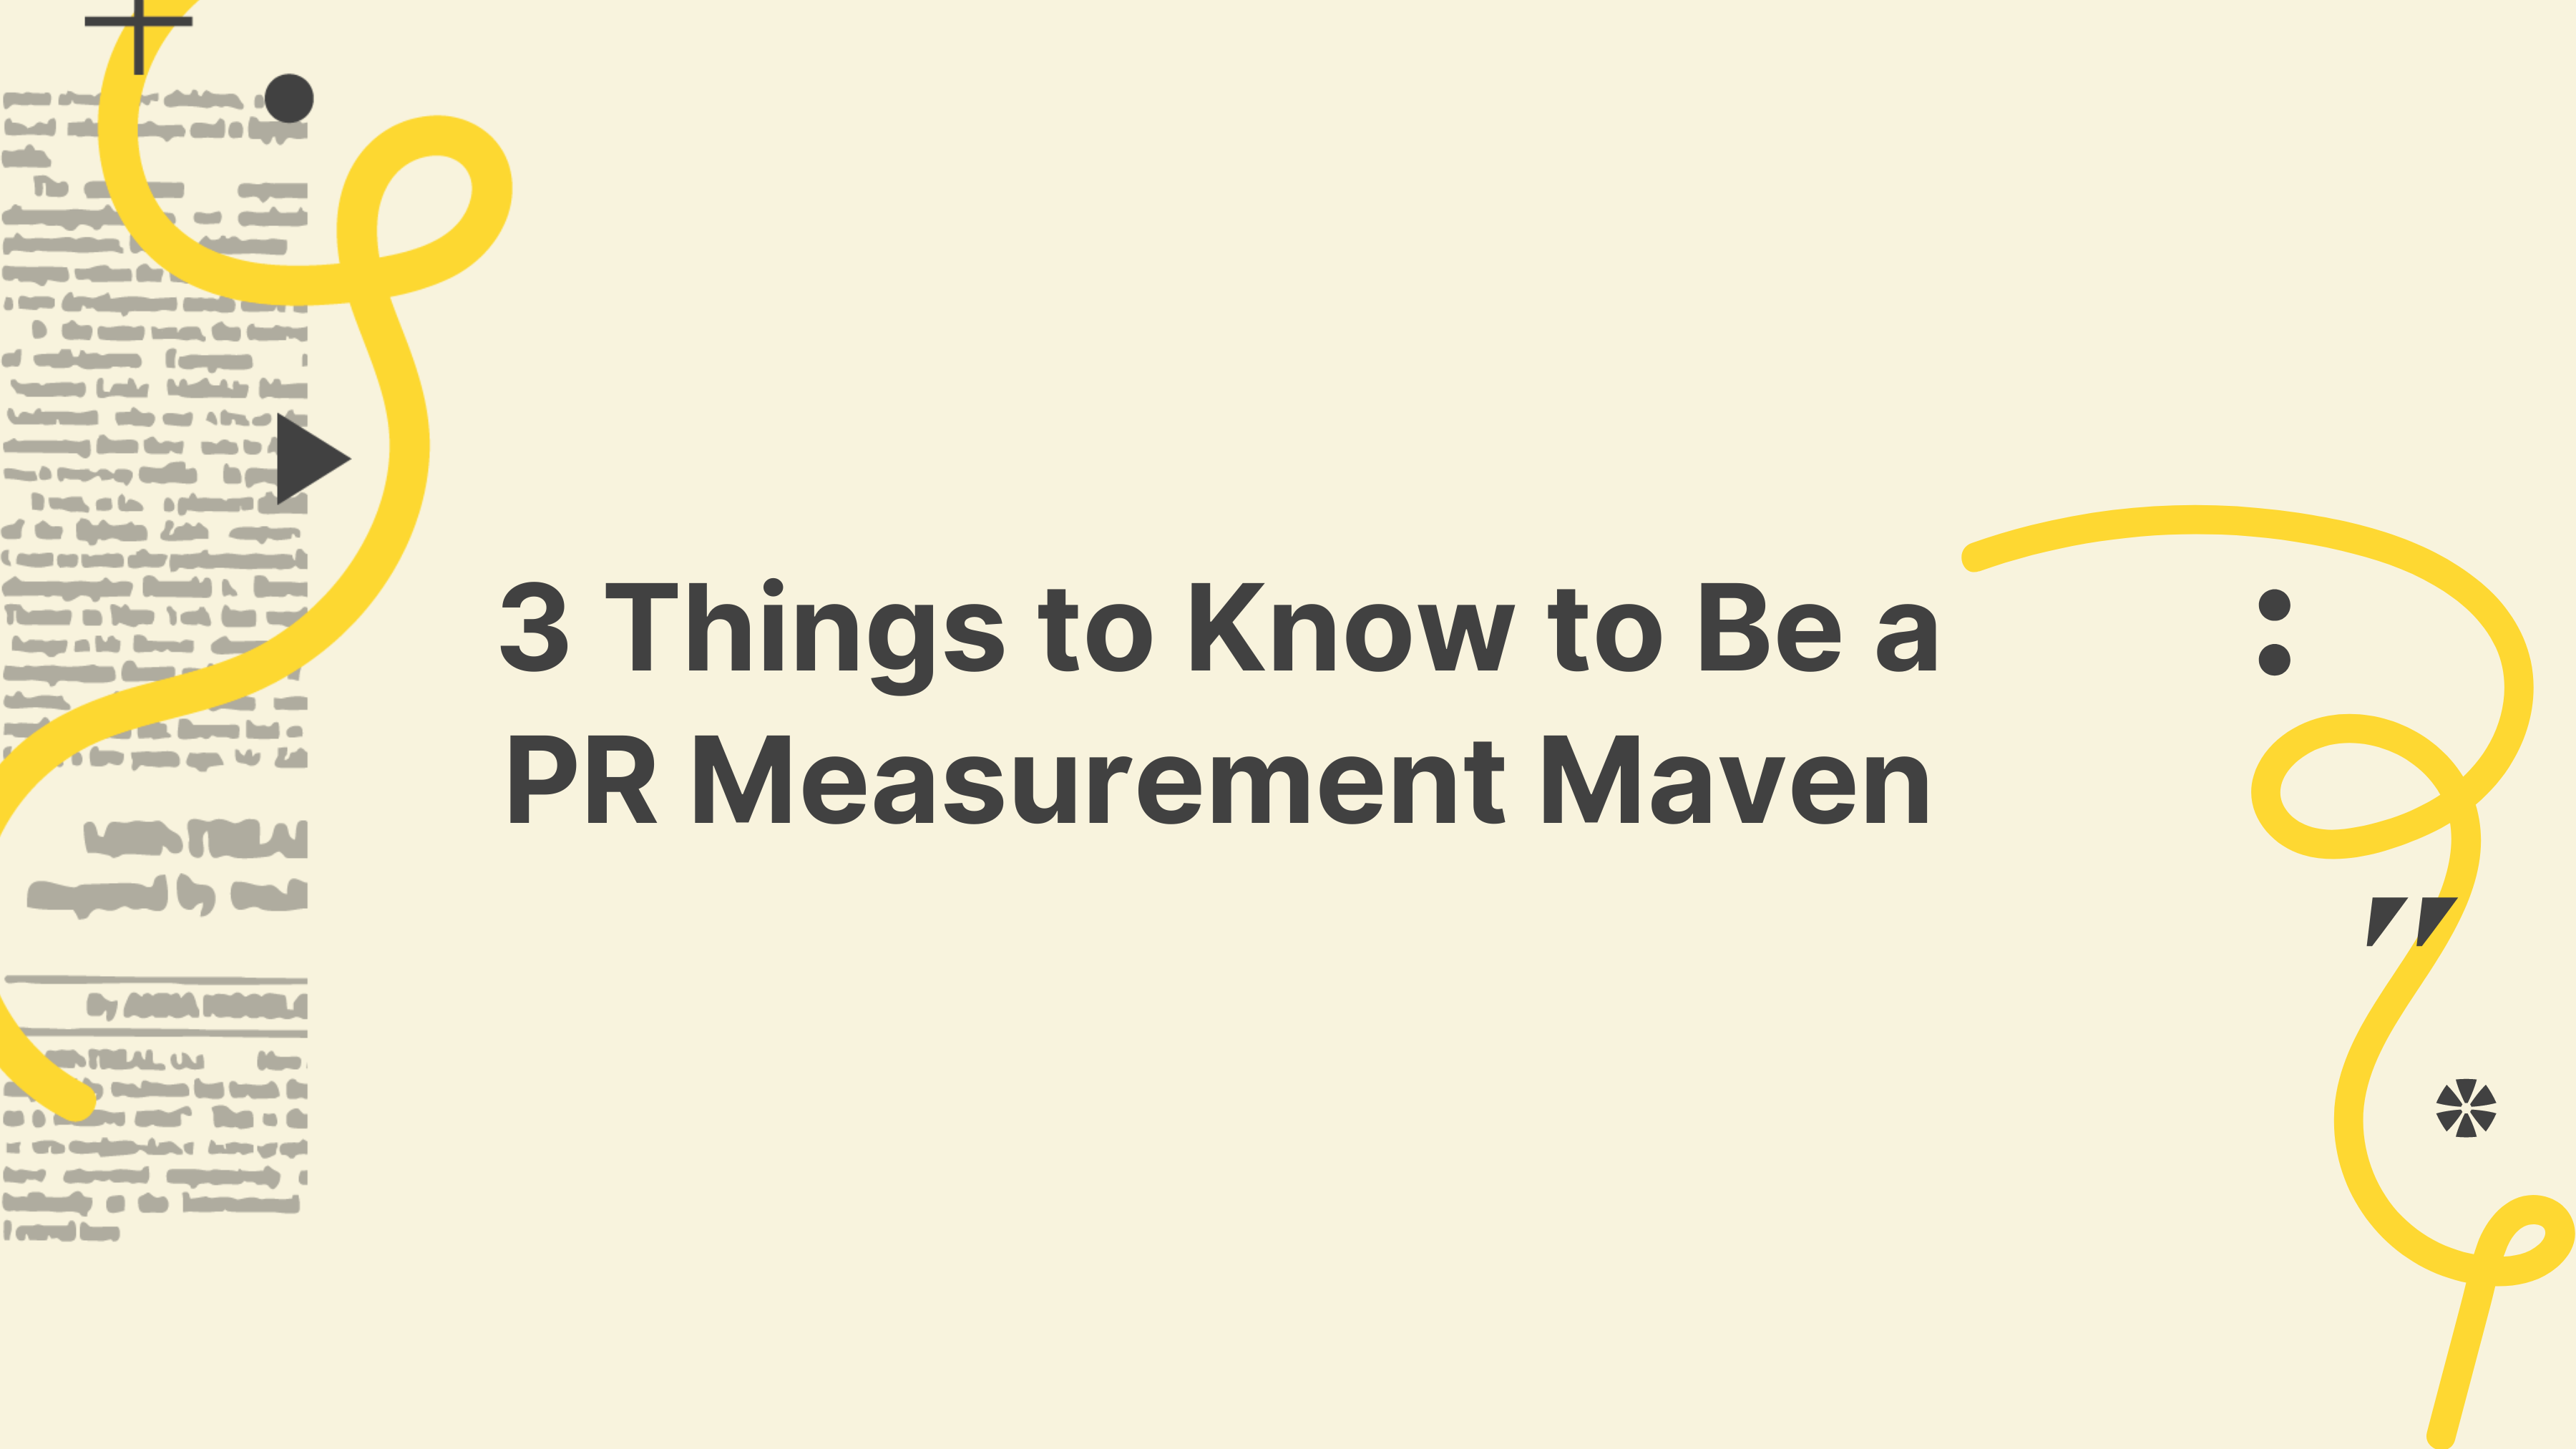 3 Things to Know to Be a PR Measurement Maven